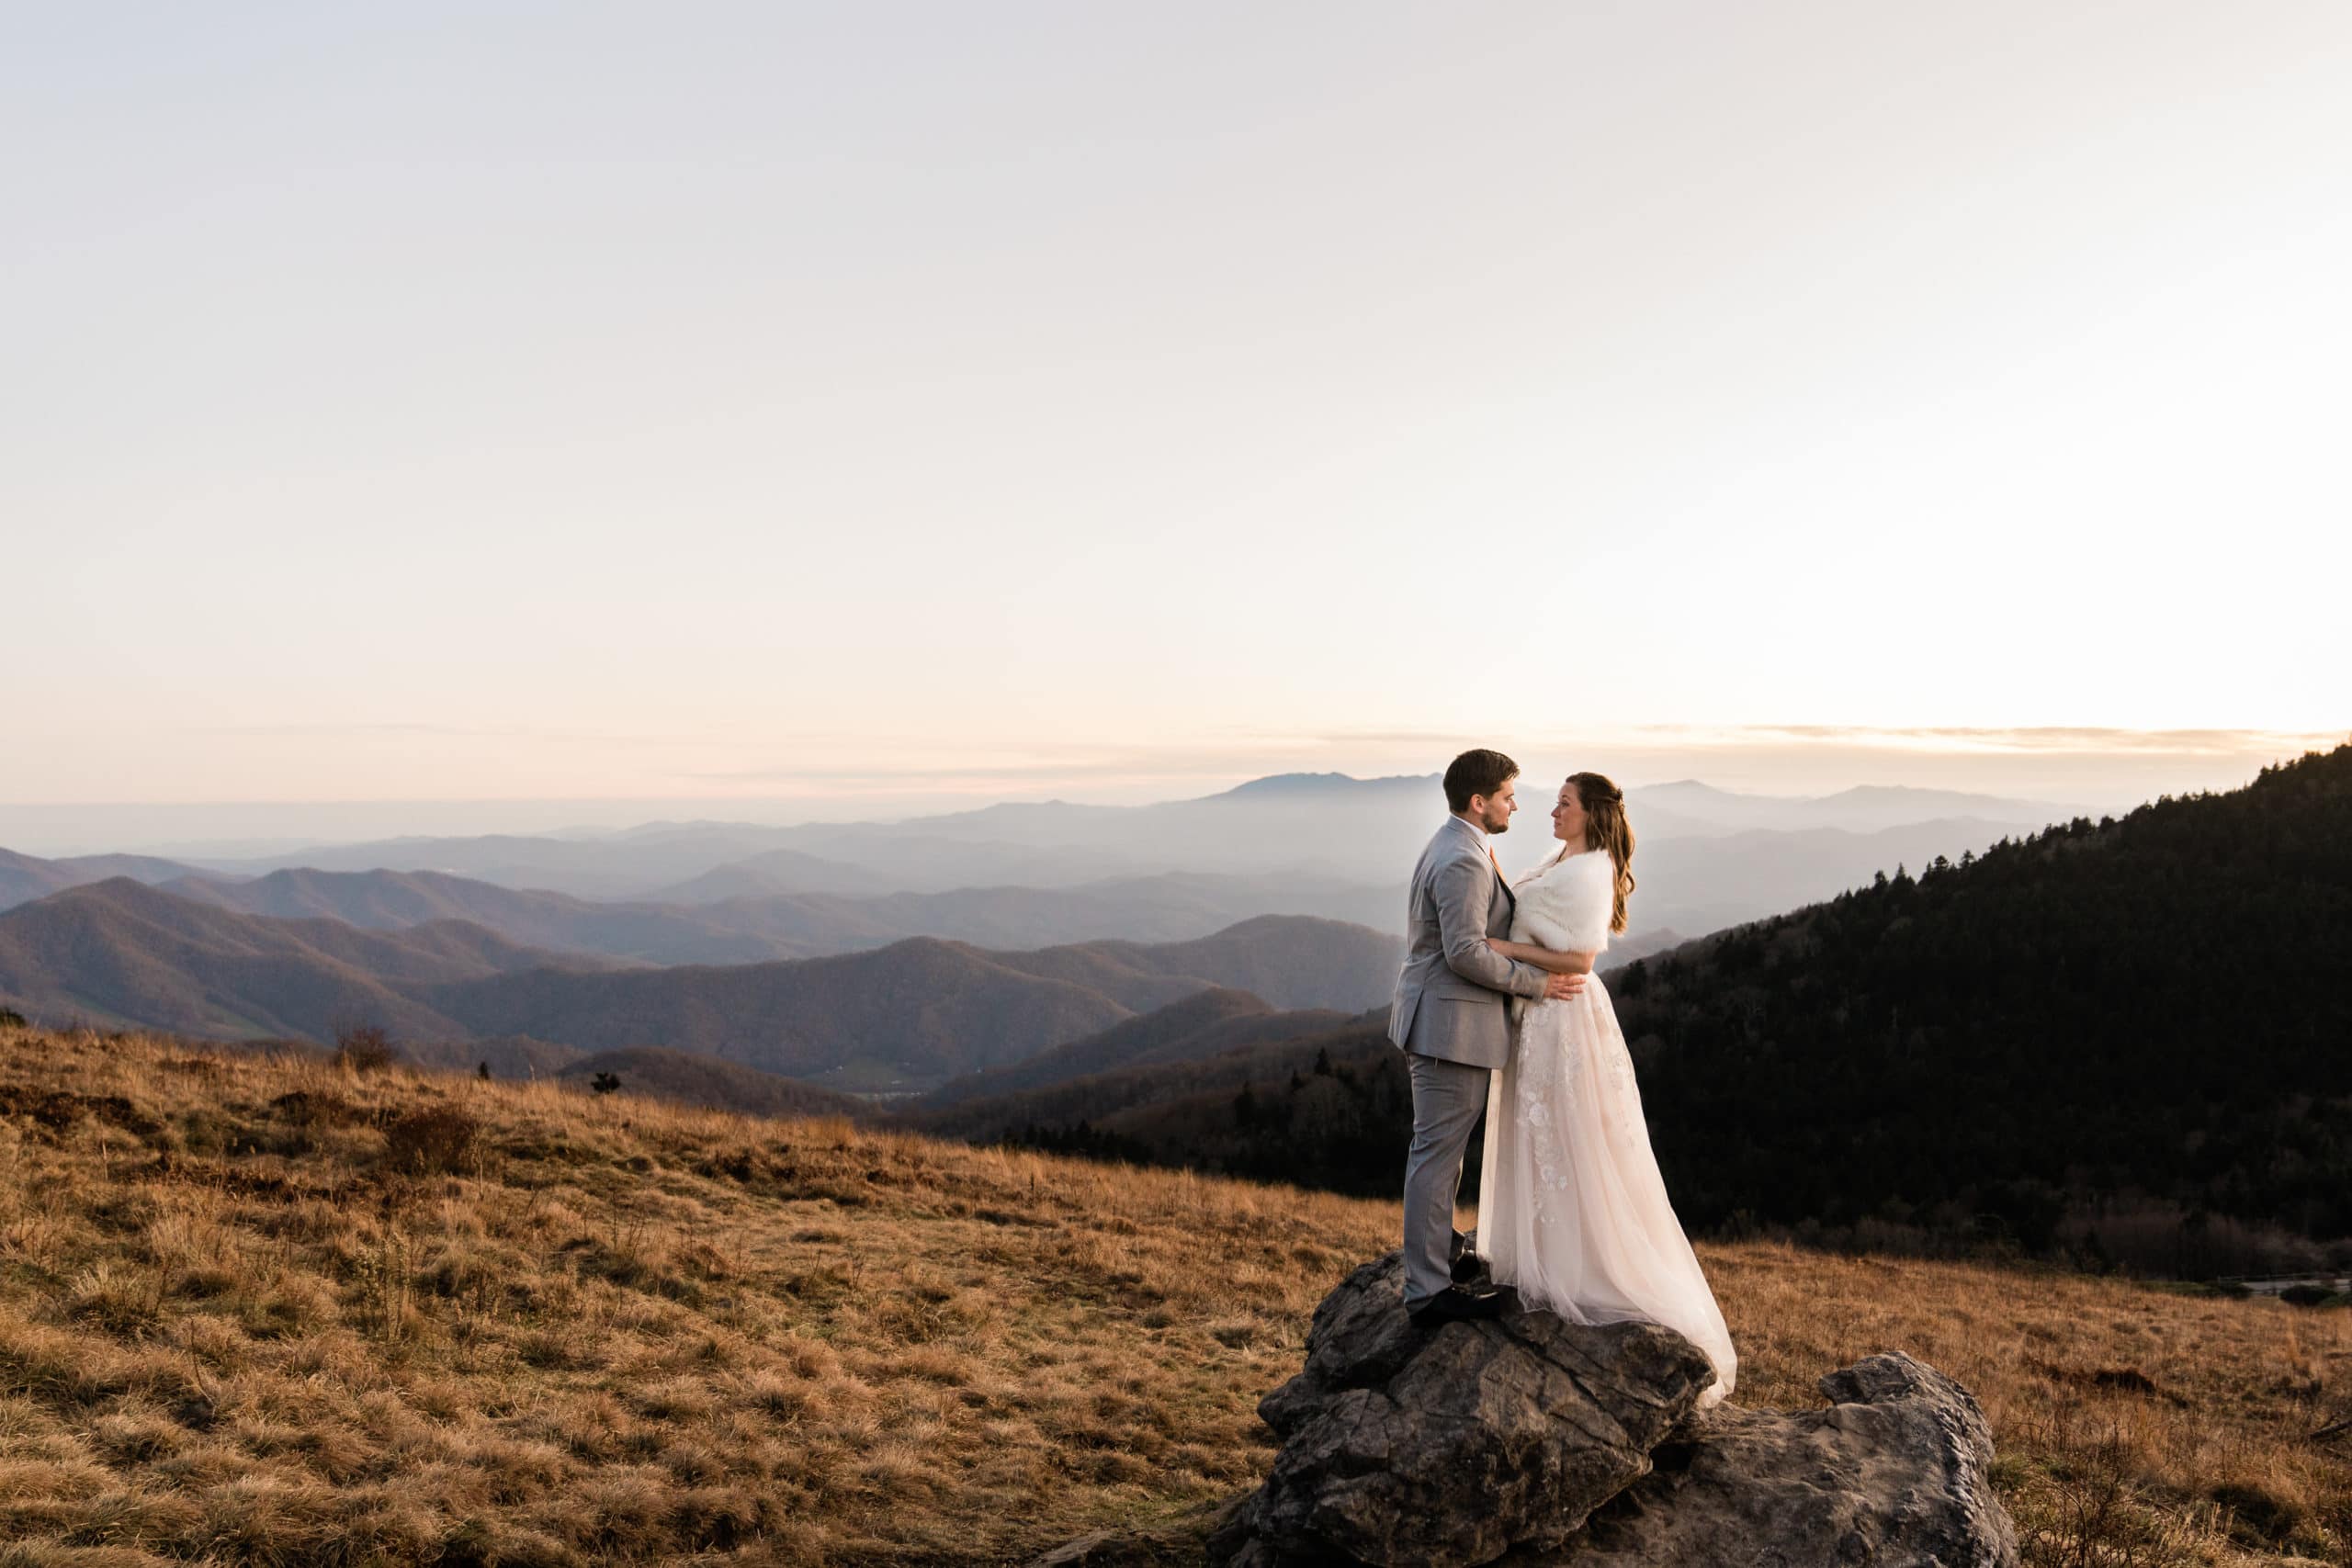 couple embraces on a rock with beautiful mountain views in the background